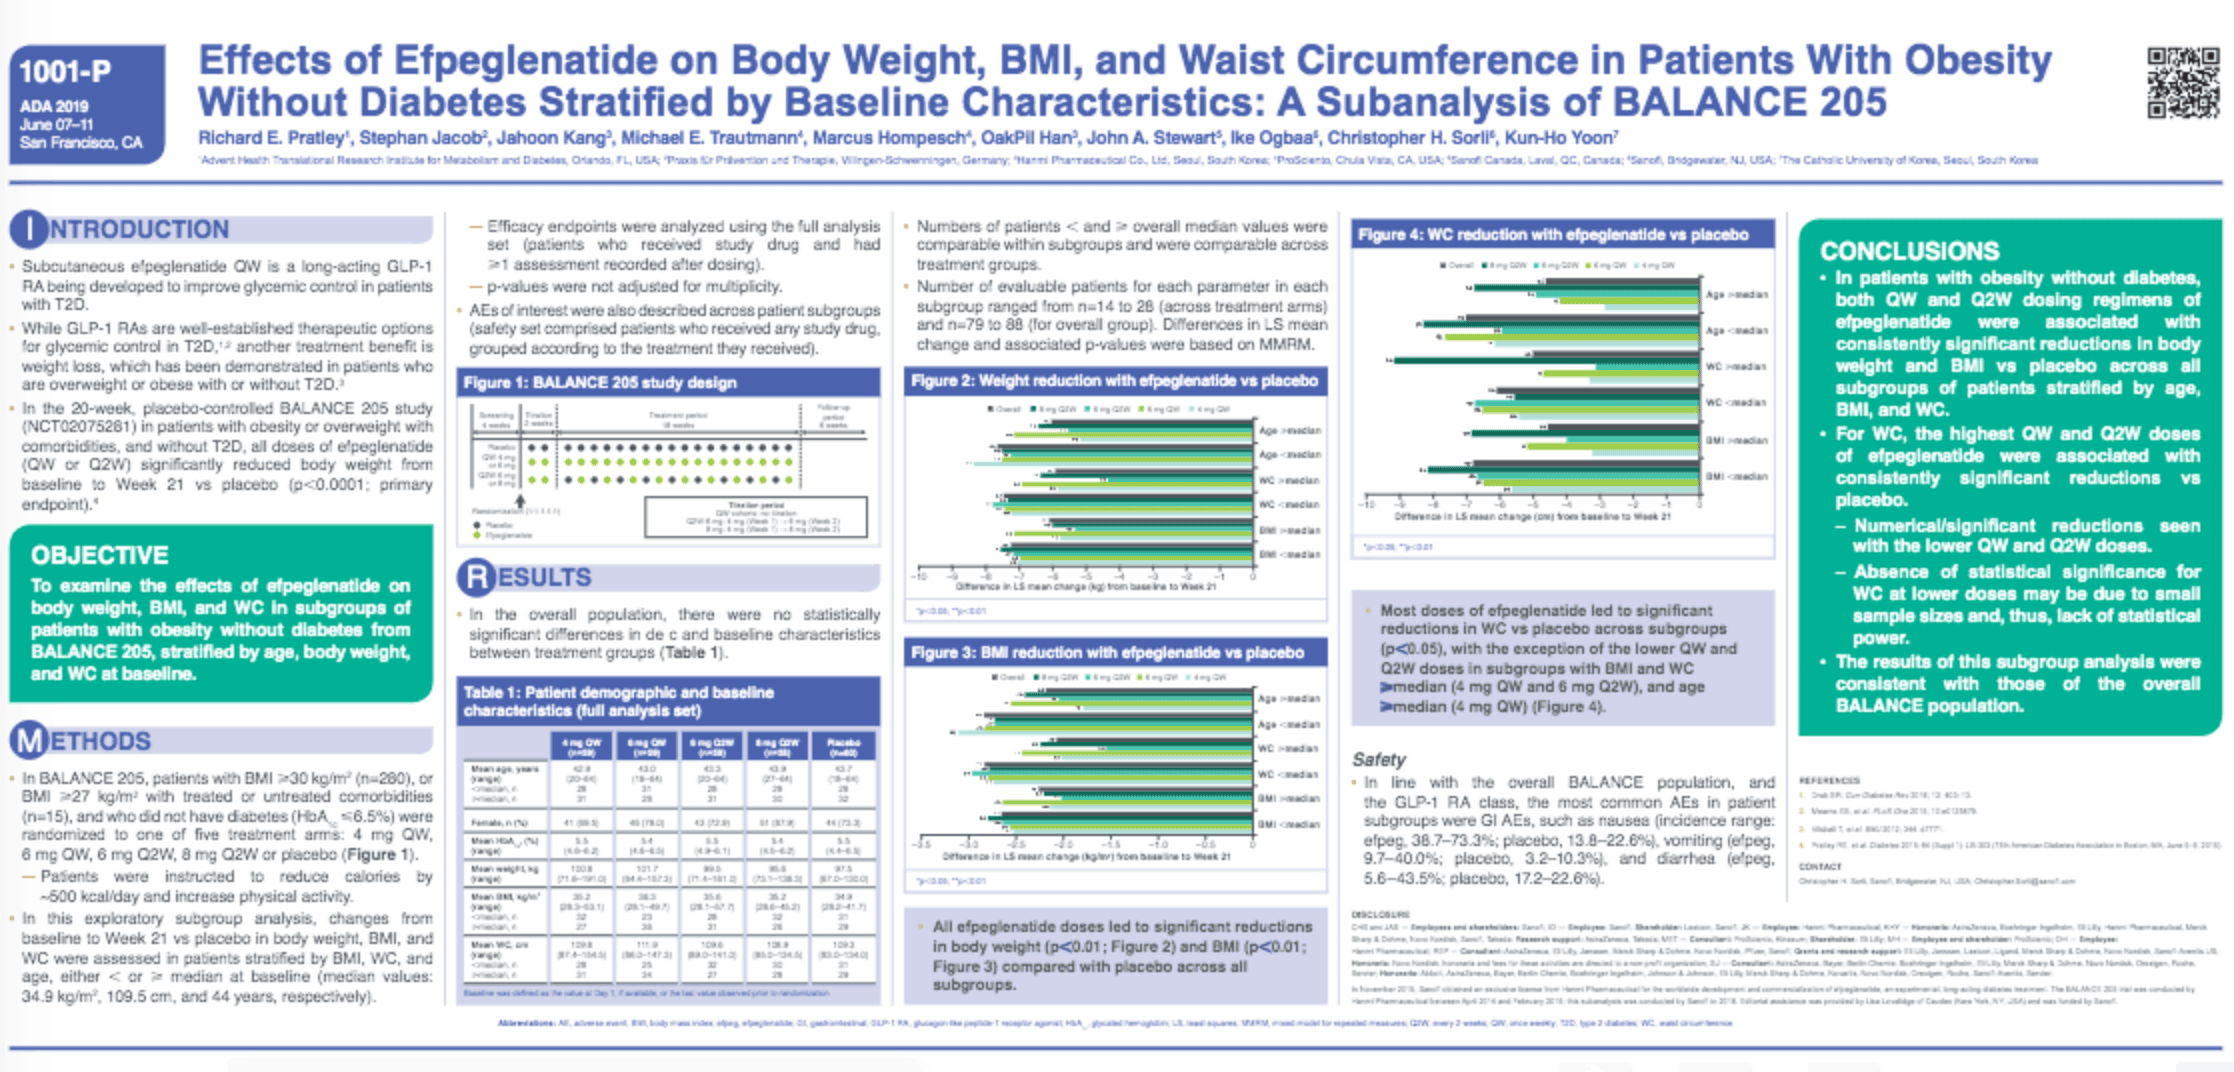 Effects of Efpeglenatide on Body Weight, BMI, and Waist Circumference in Patients With Obesity Without Diabetes Stratified by Baseline Characteristics: A Subanalysis of BALANCE 205 thumbnail